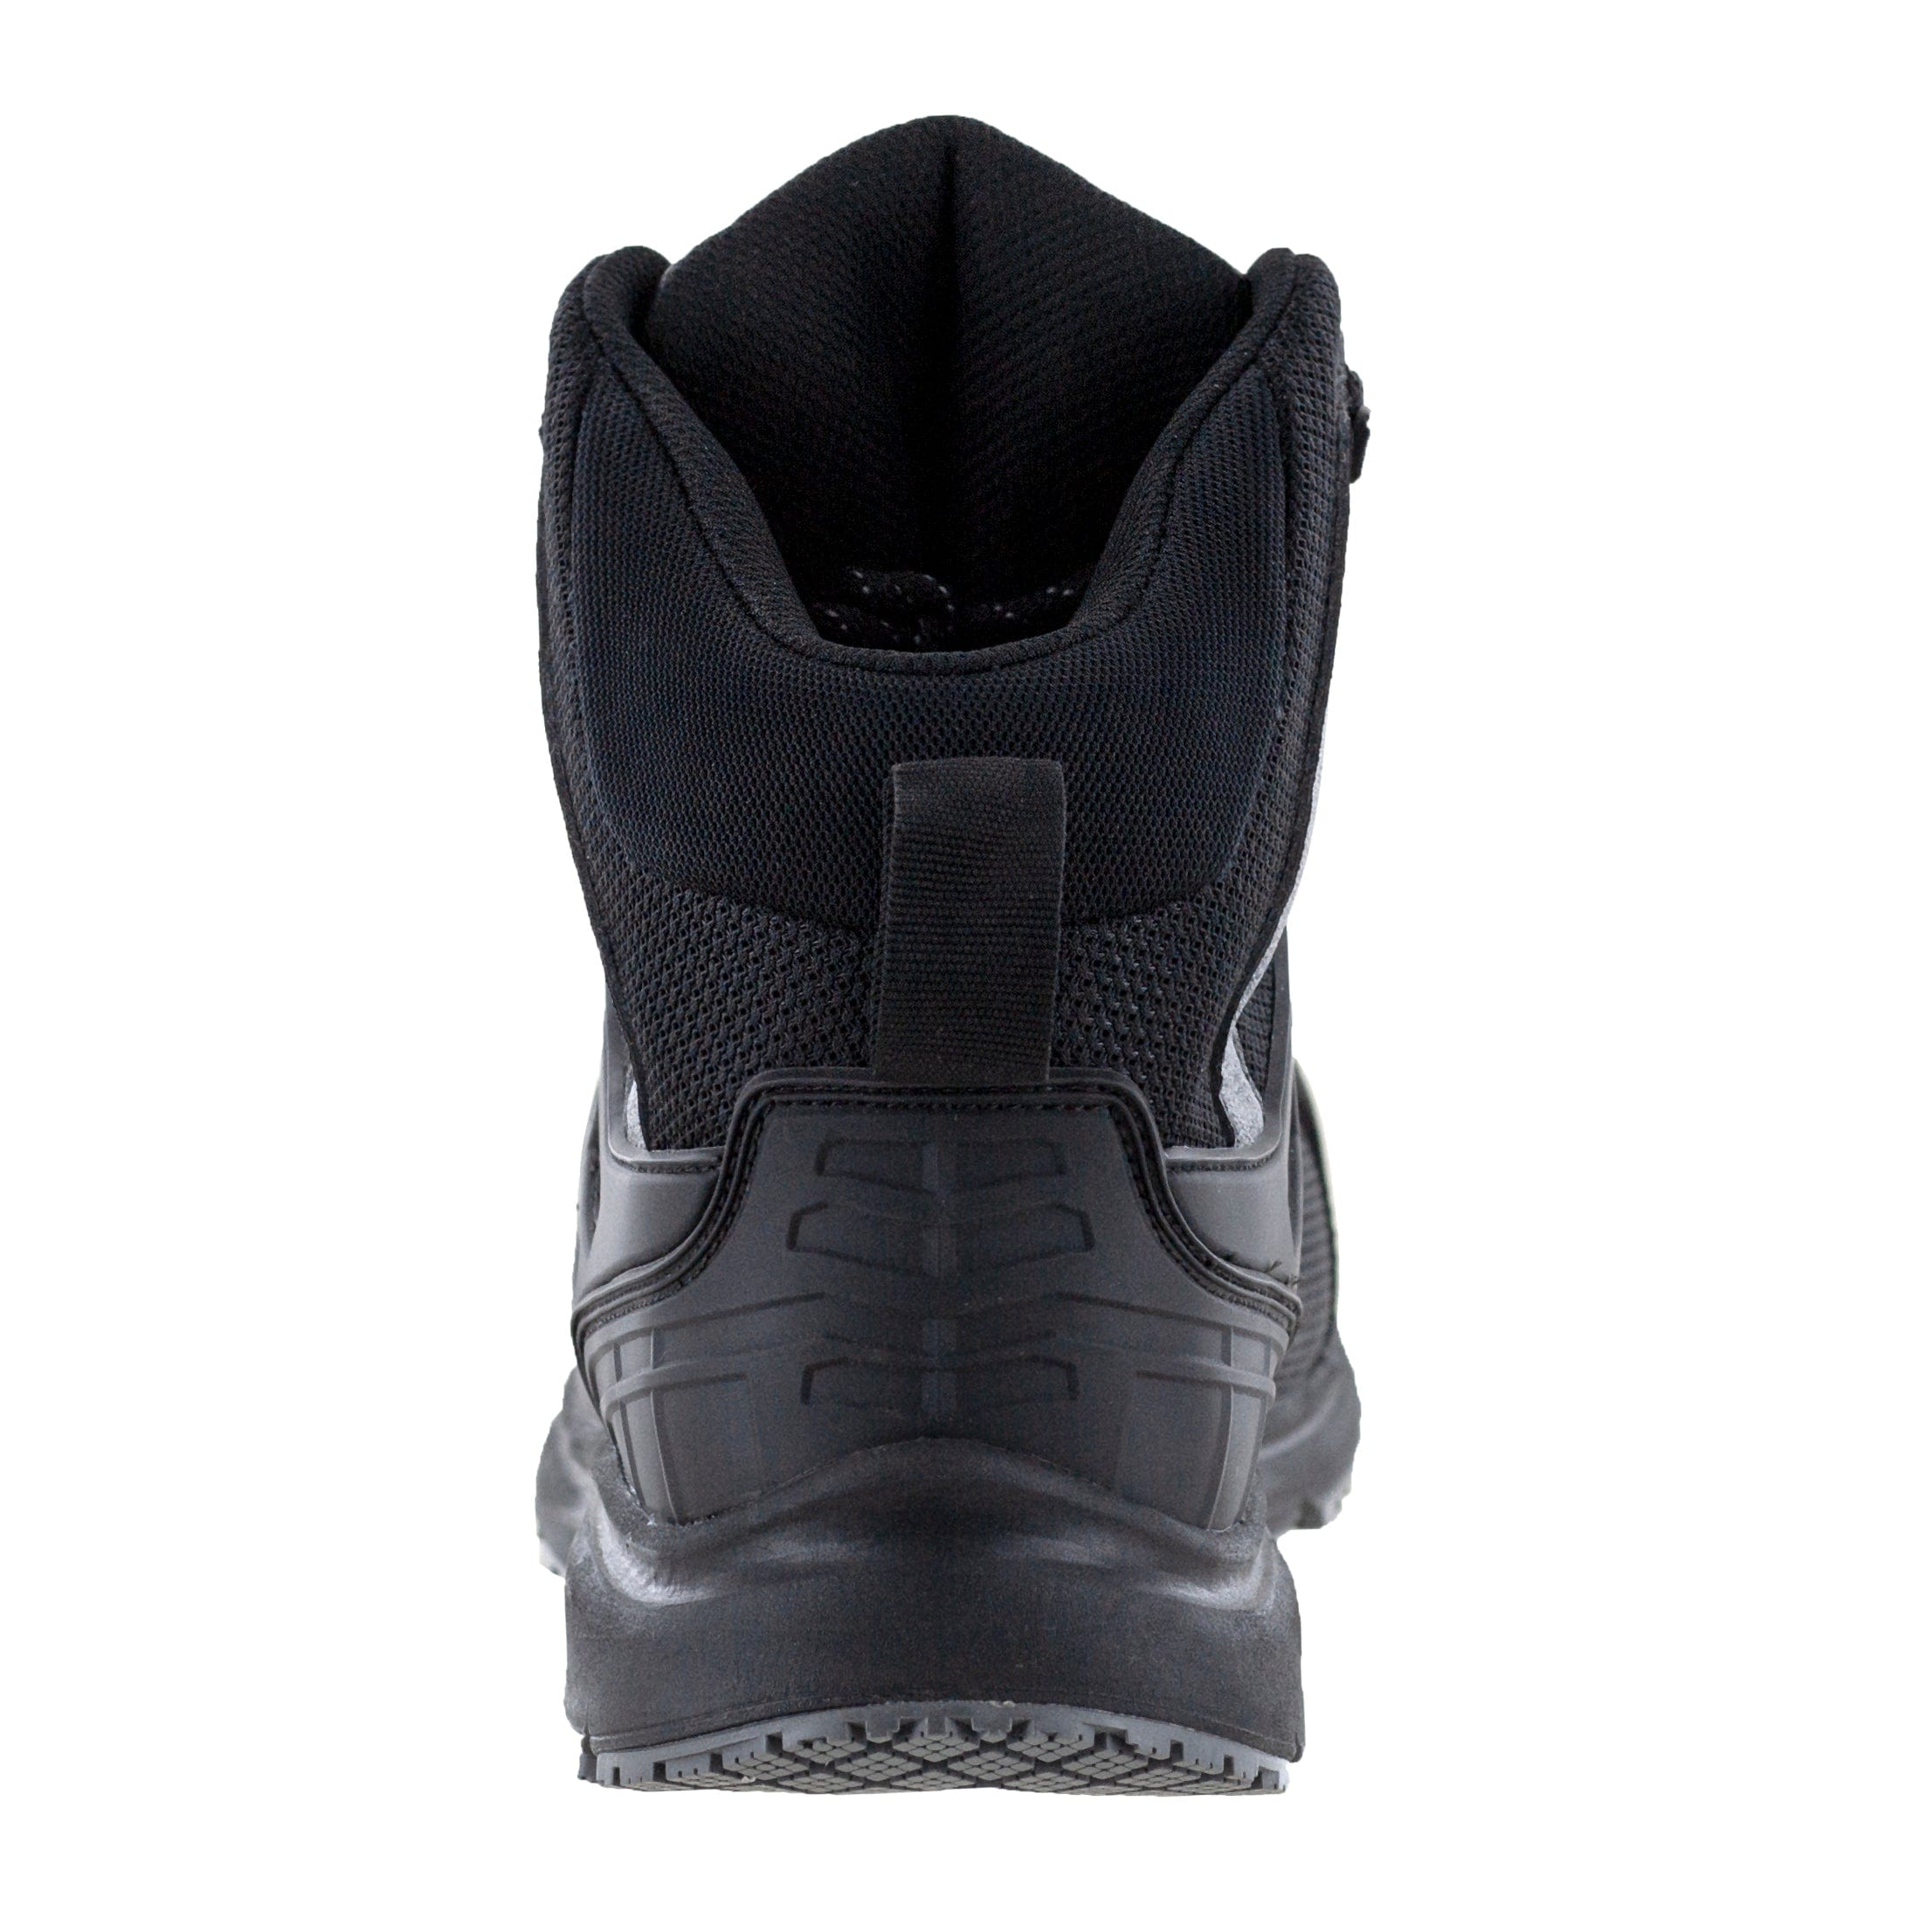 Breathable waterproof carbon fiber toe work boots for men